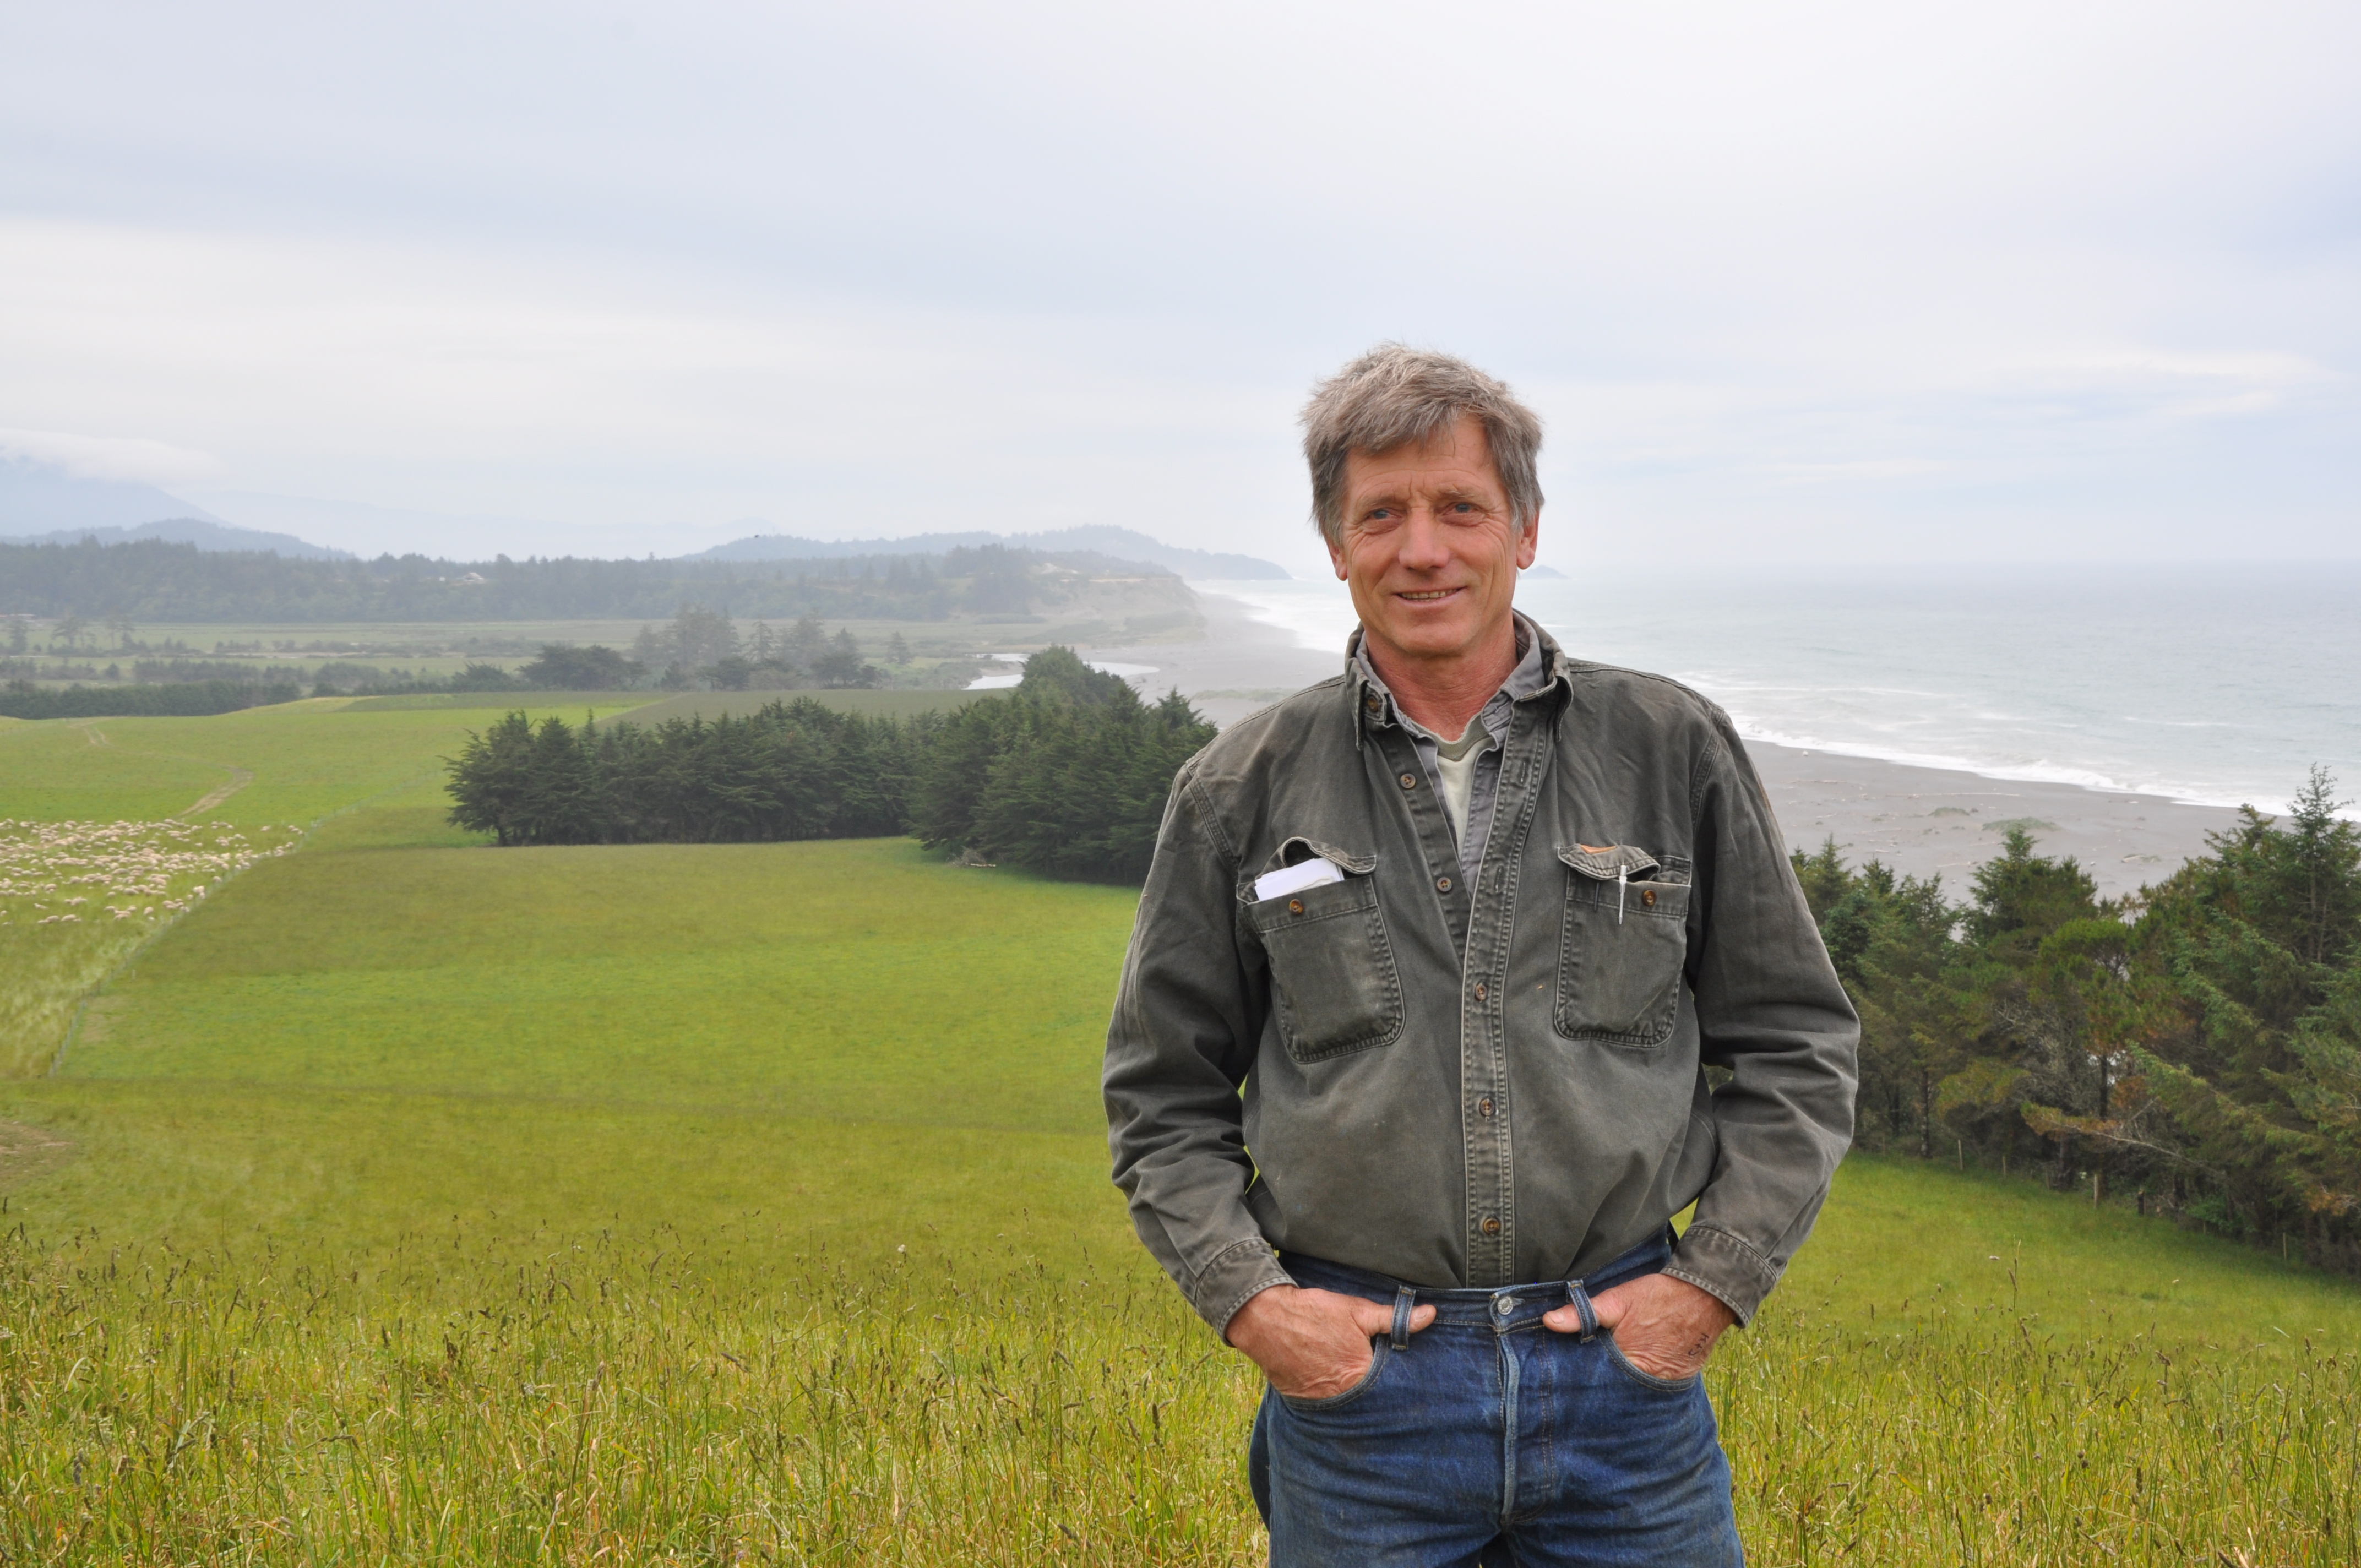 Pete Wahl poses at Wahl Family Farm as sheep graze atop cliffs overlooking the union of the Elk River and Pacific Ocean.